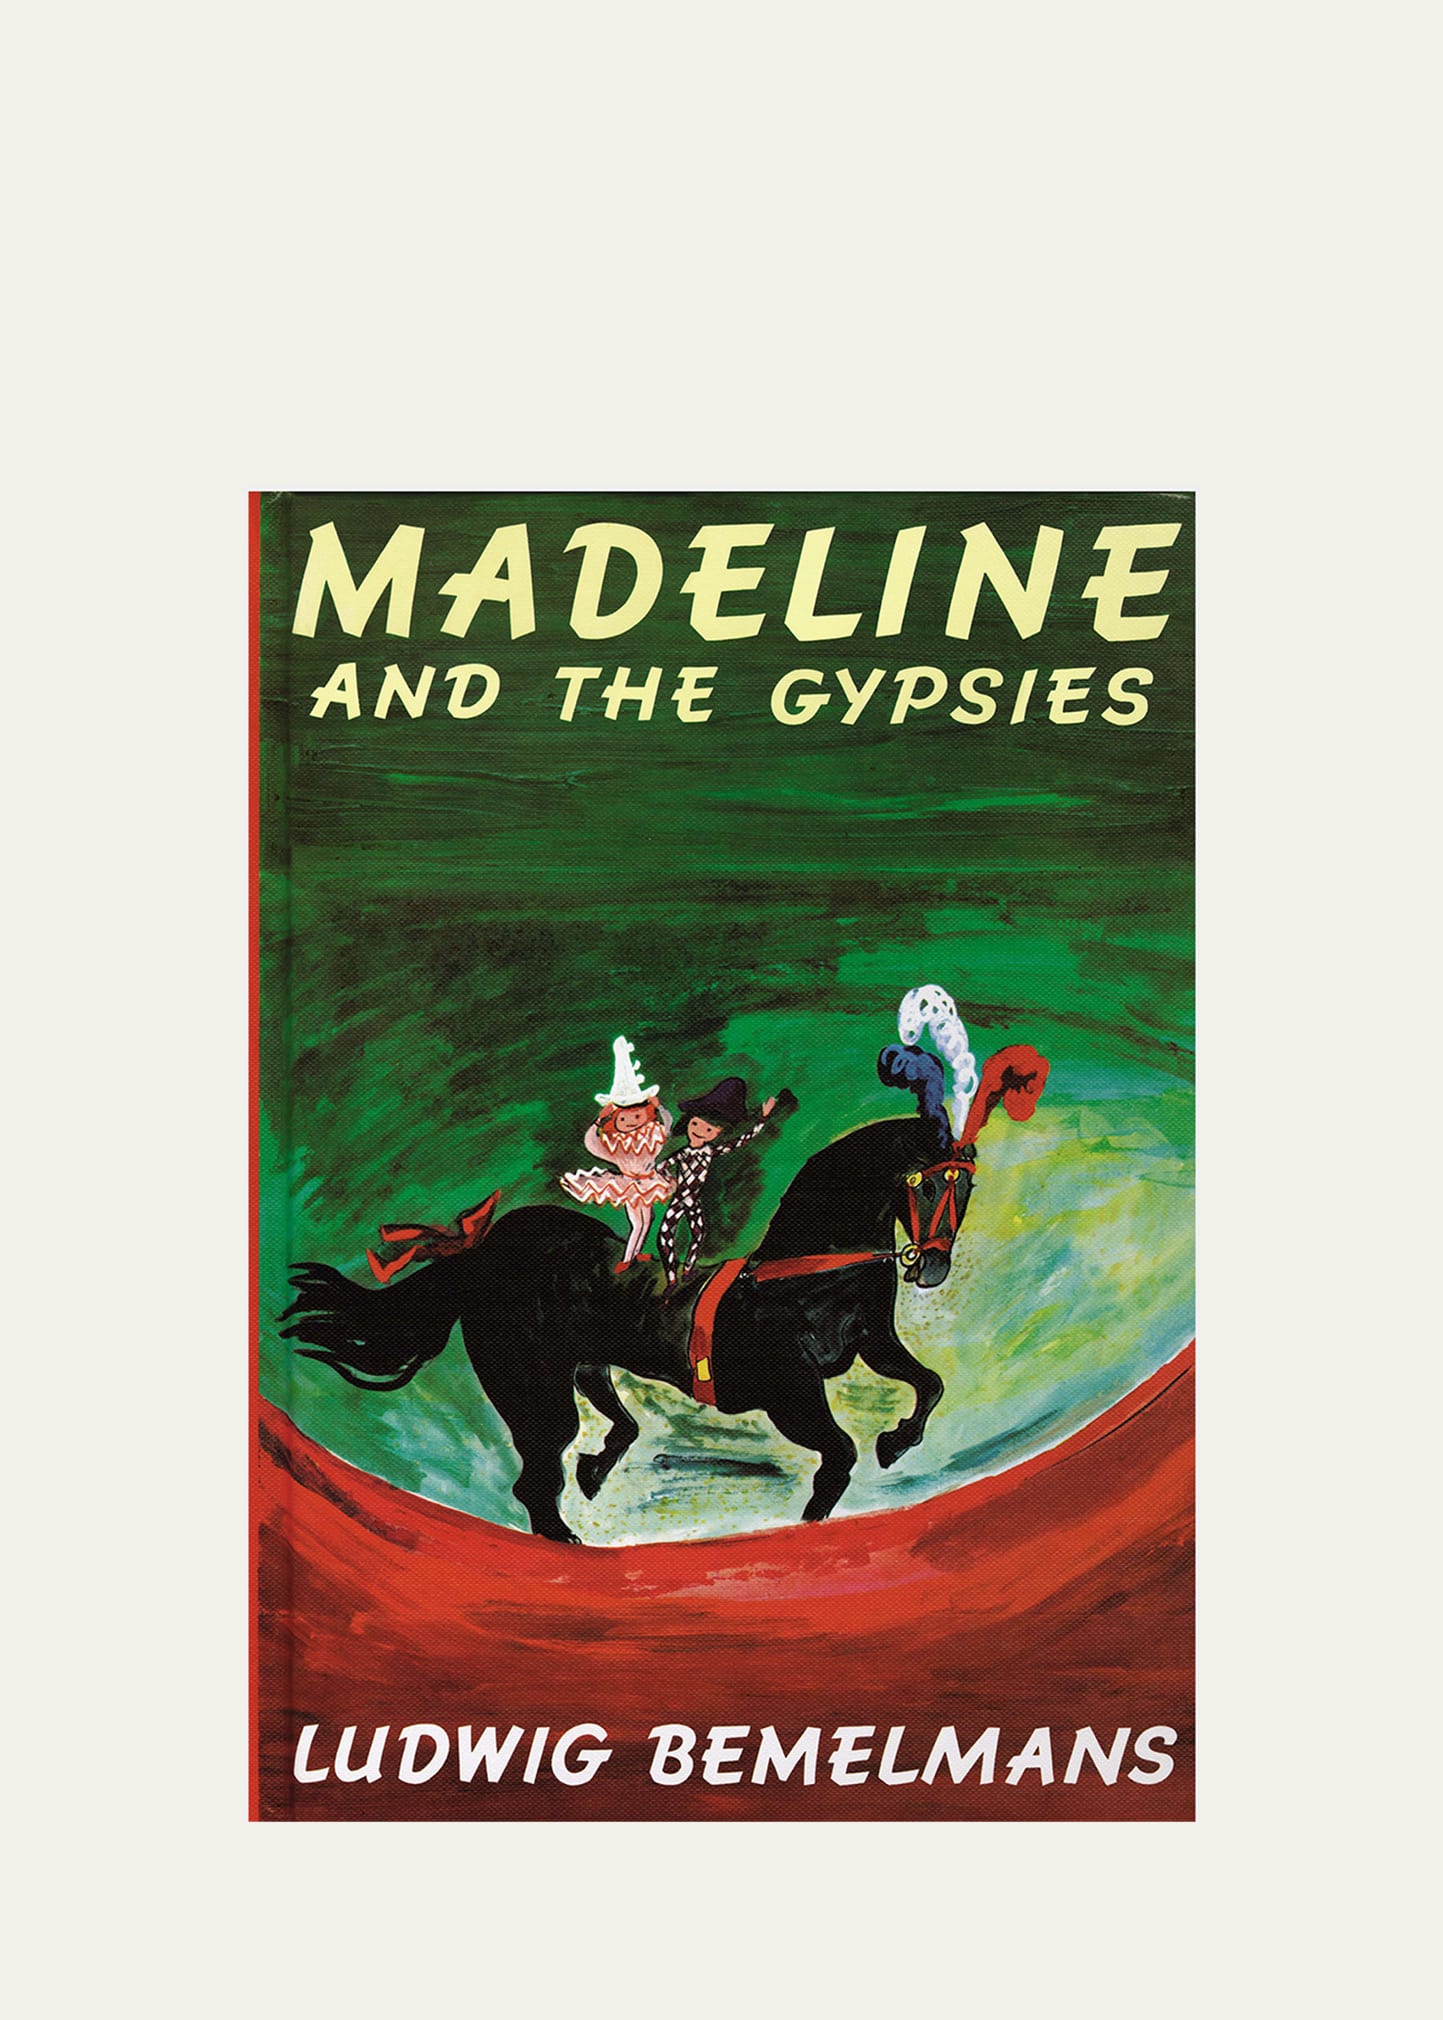 MADELINE AND THE GYPSIES